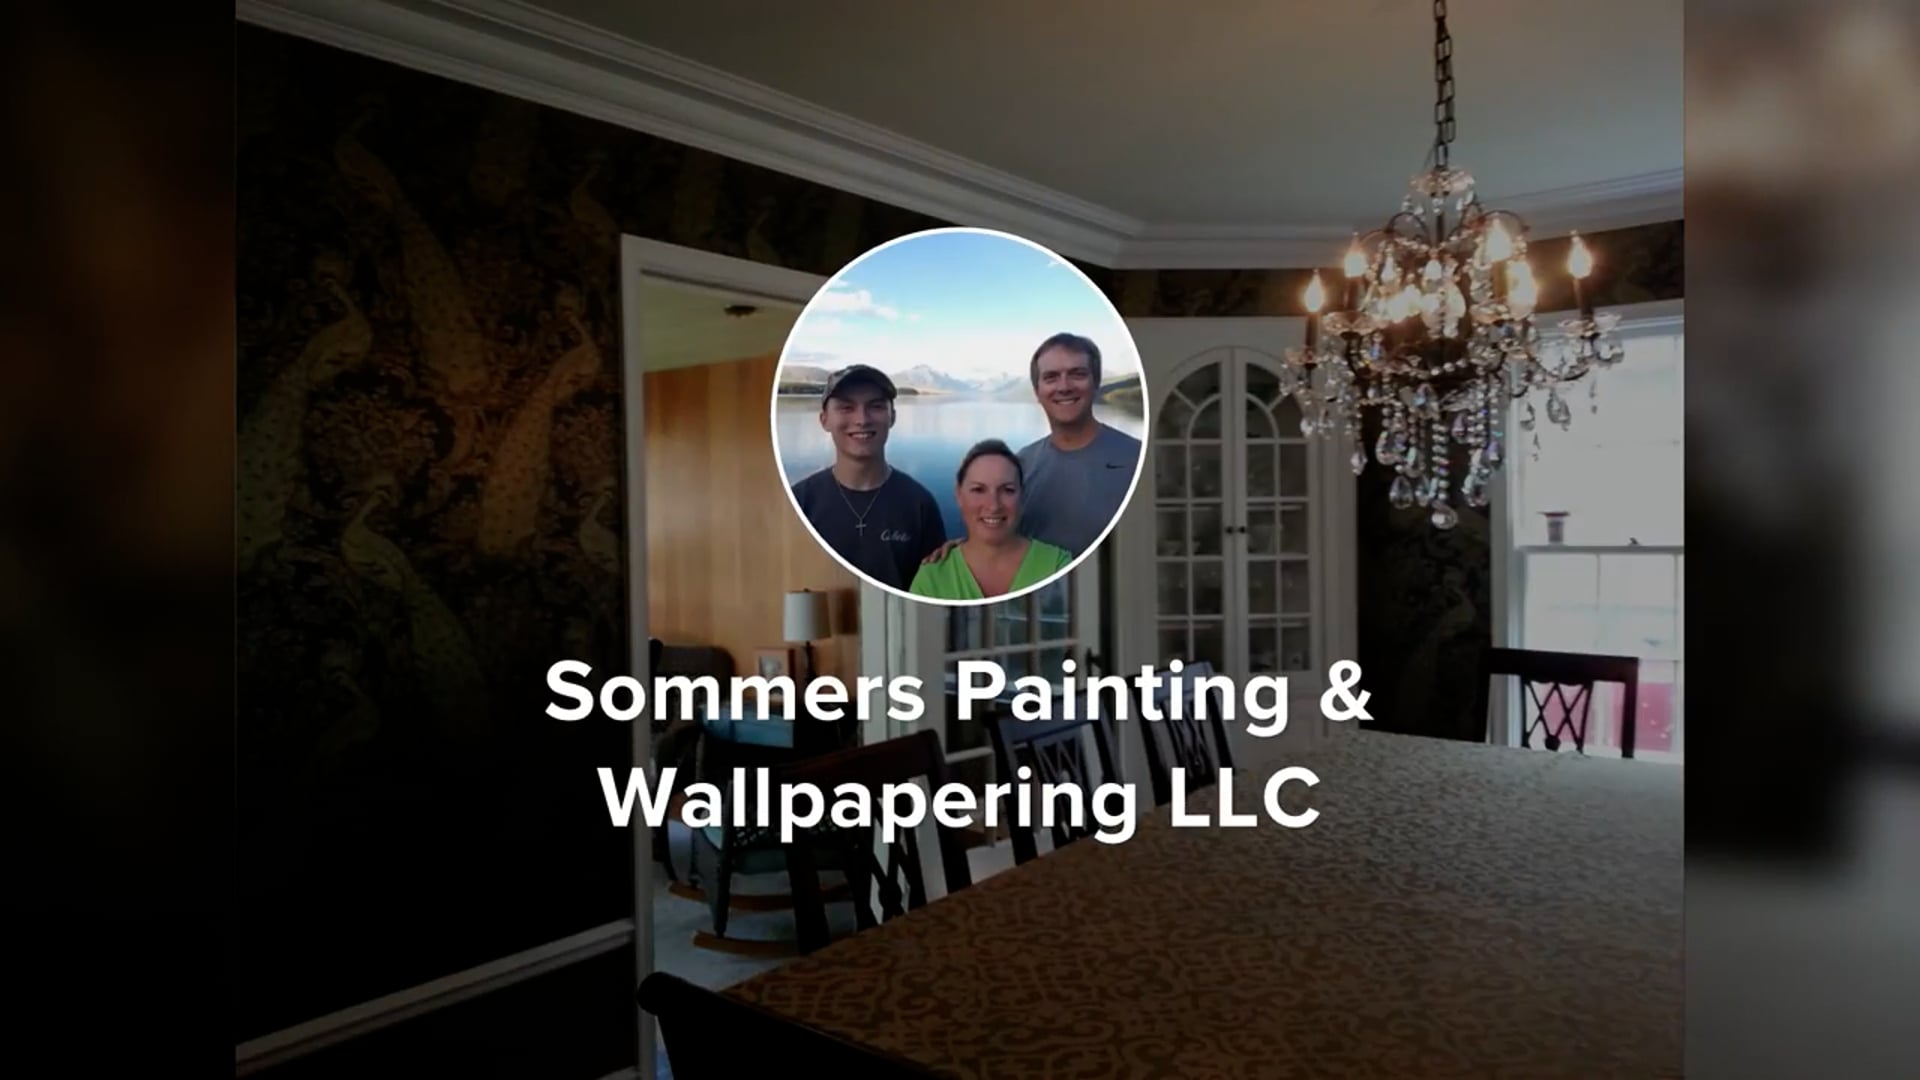 Wallpapers By T - Wallpaper Installation Services